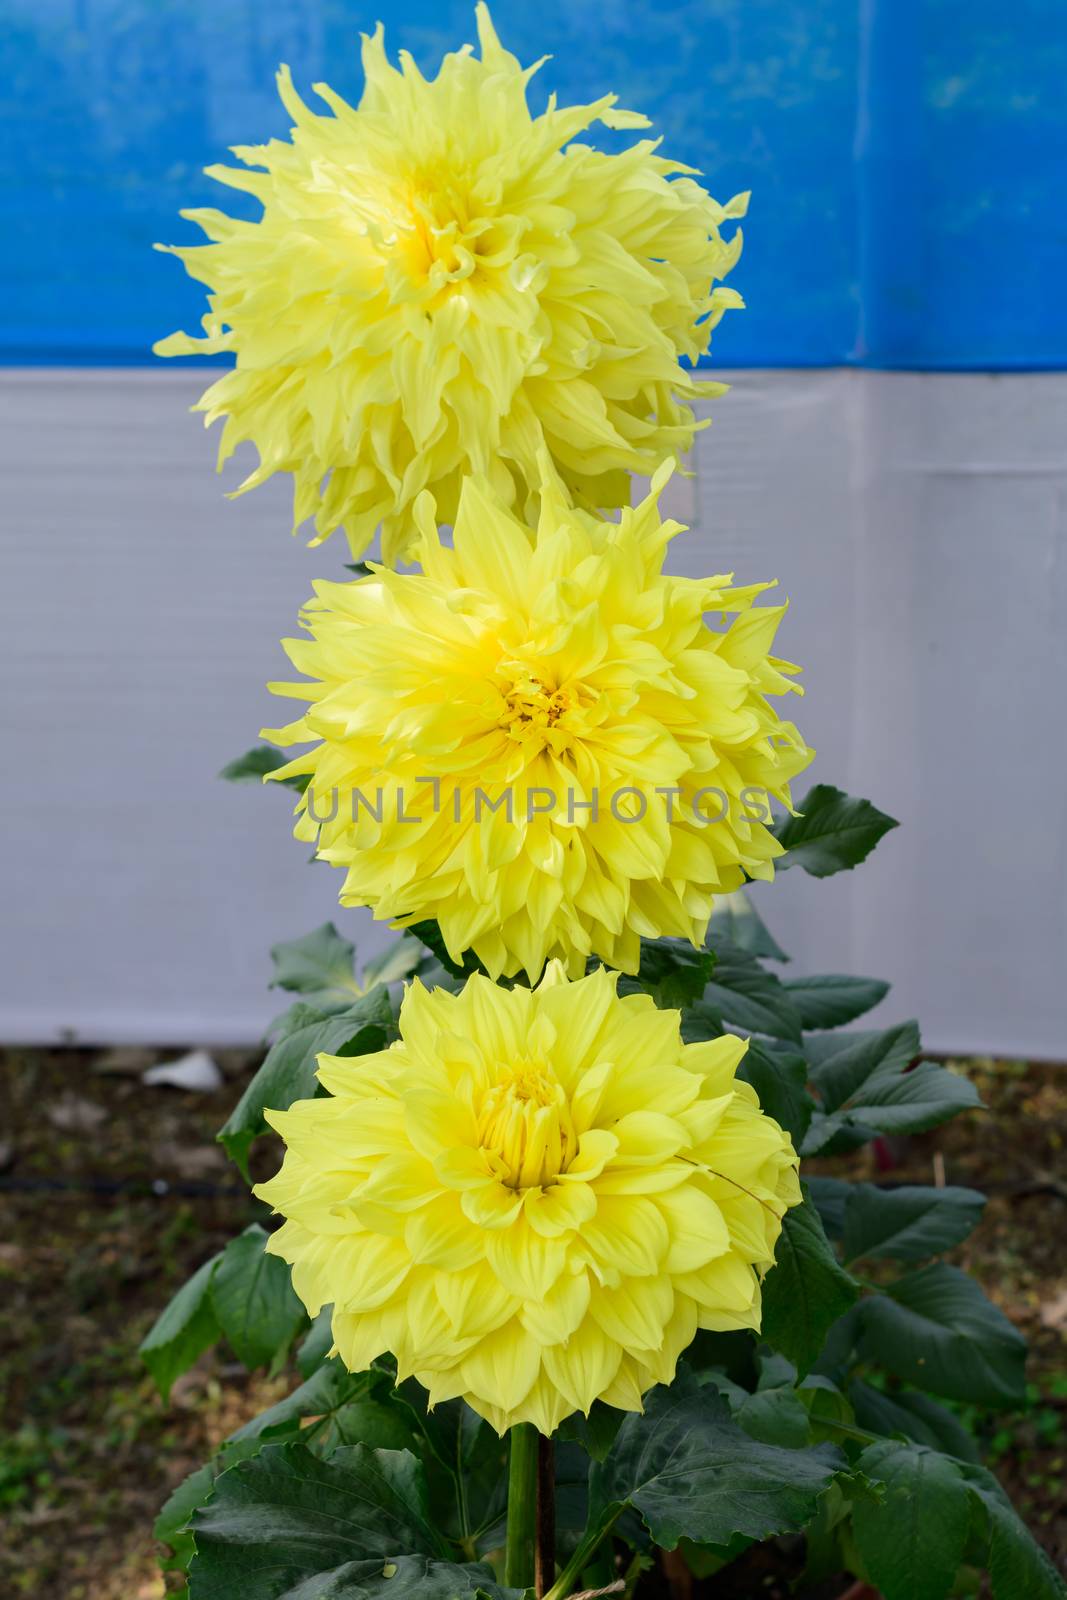 Yellow Guldavari Flower plant, a herbaceous perennial plants. It is a sun loving plant Blooms in early spring to late summer. A very popular flower for gardens and bouquets. Copy space room for text.